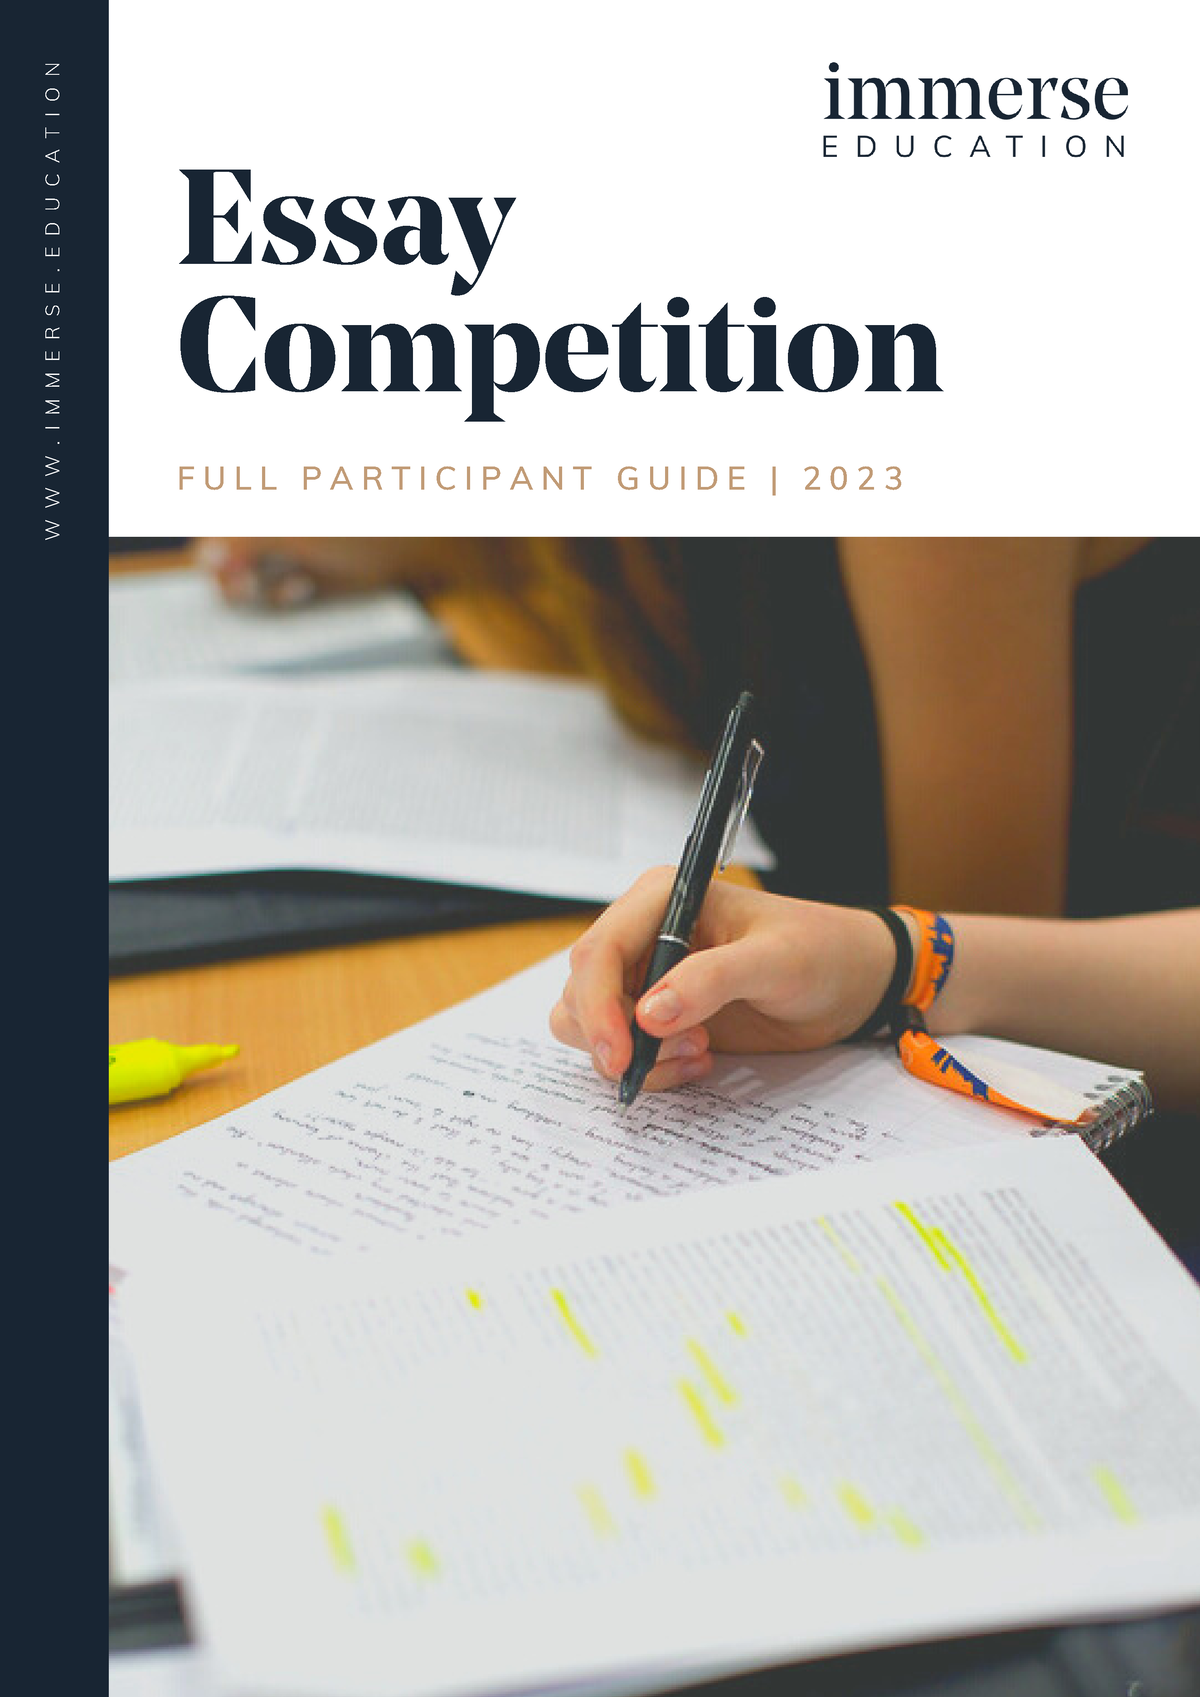 immerse essay competition topics 2023